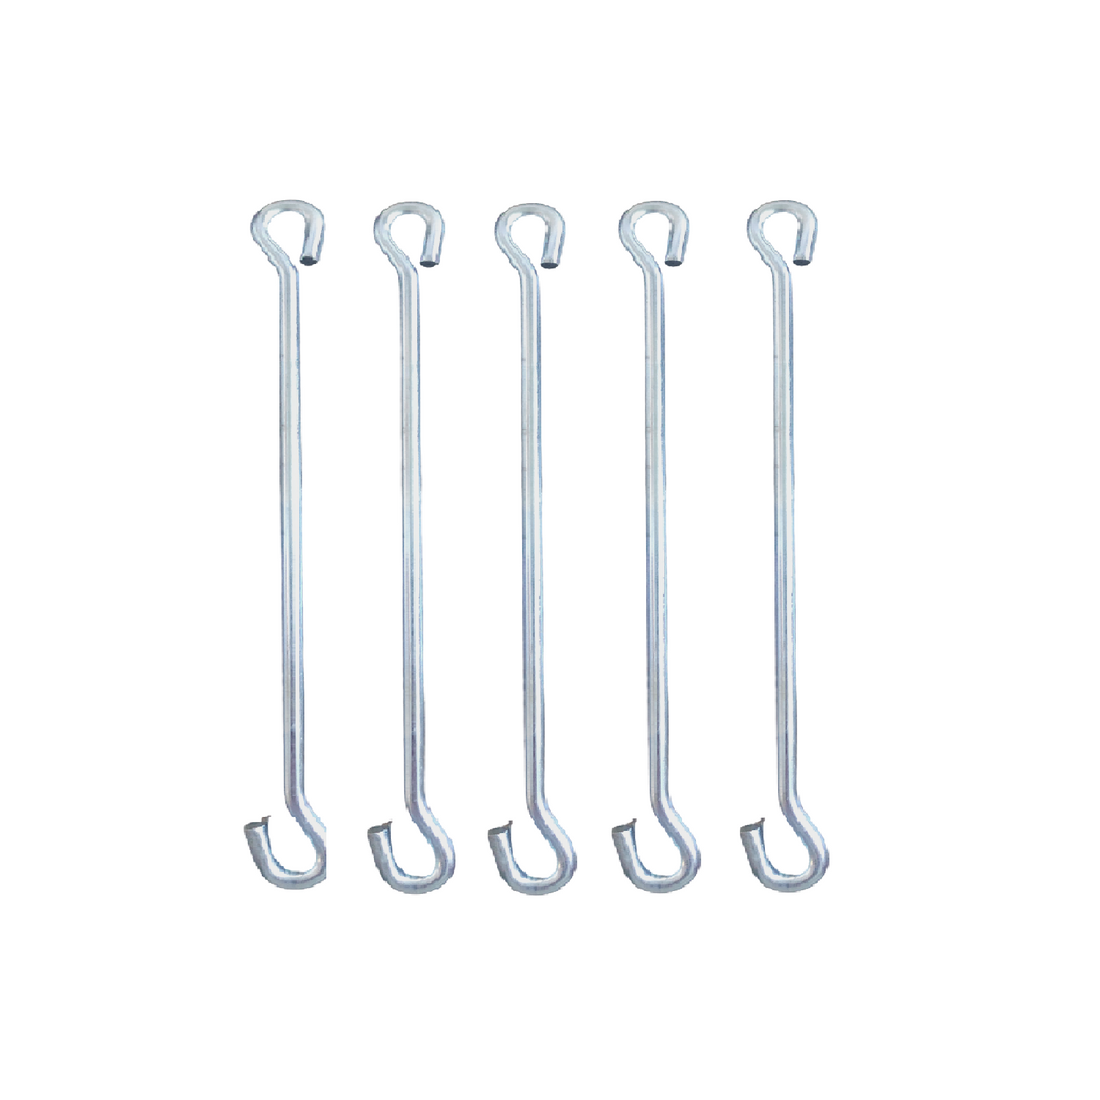 Hanging Accessories Set for Porch Swings - 5 Rod